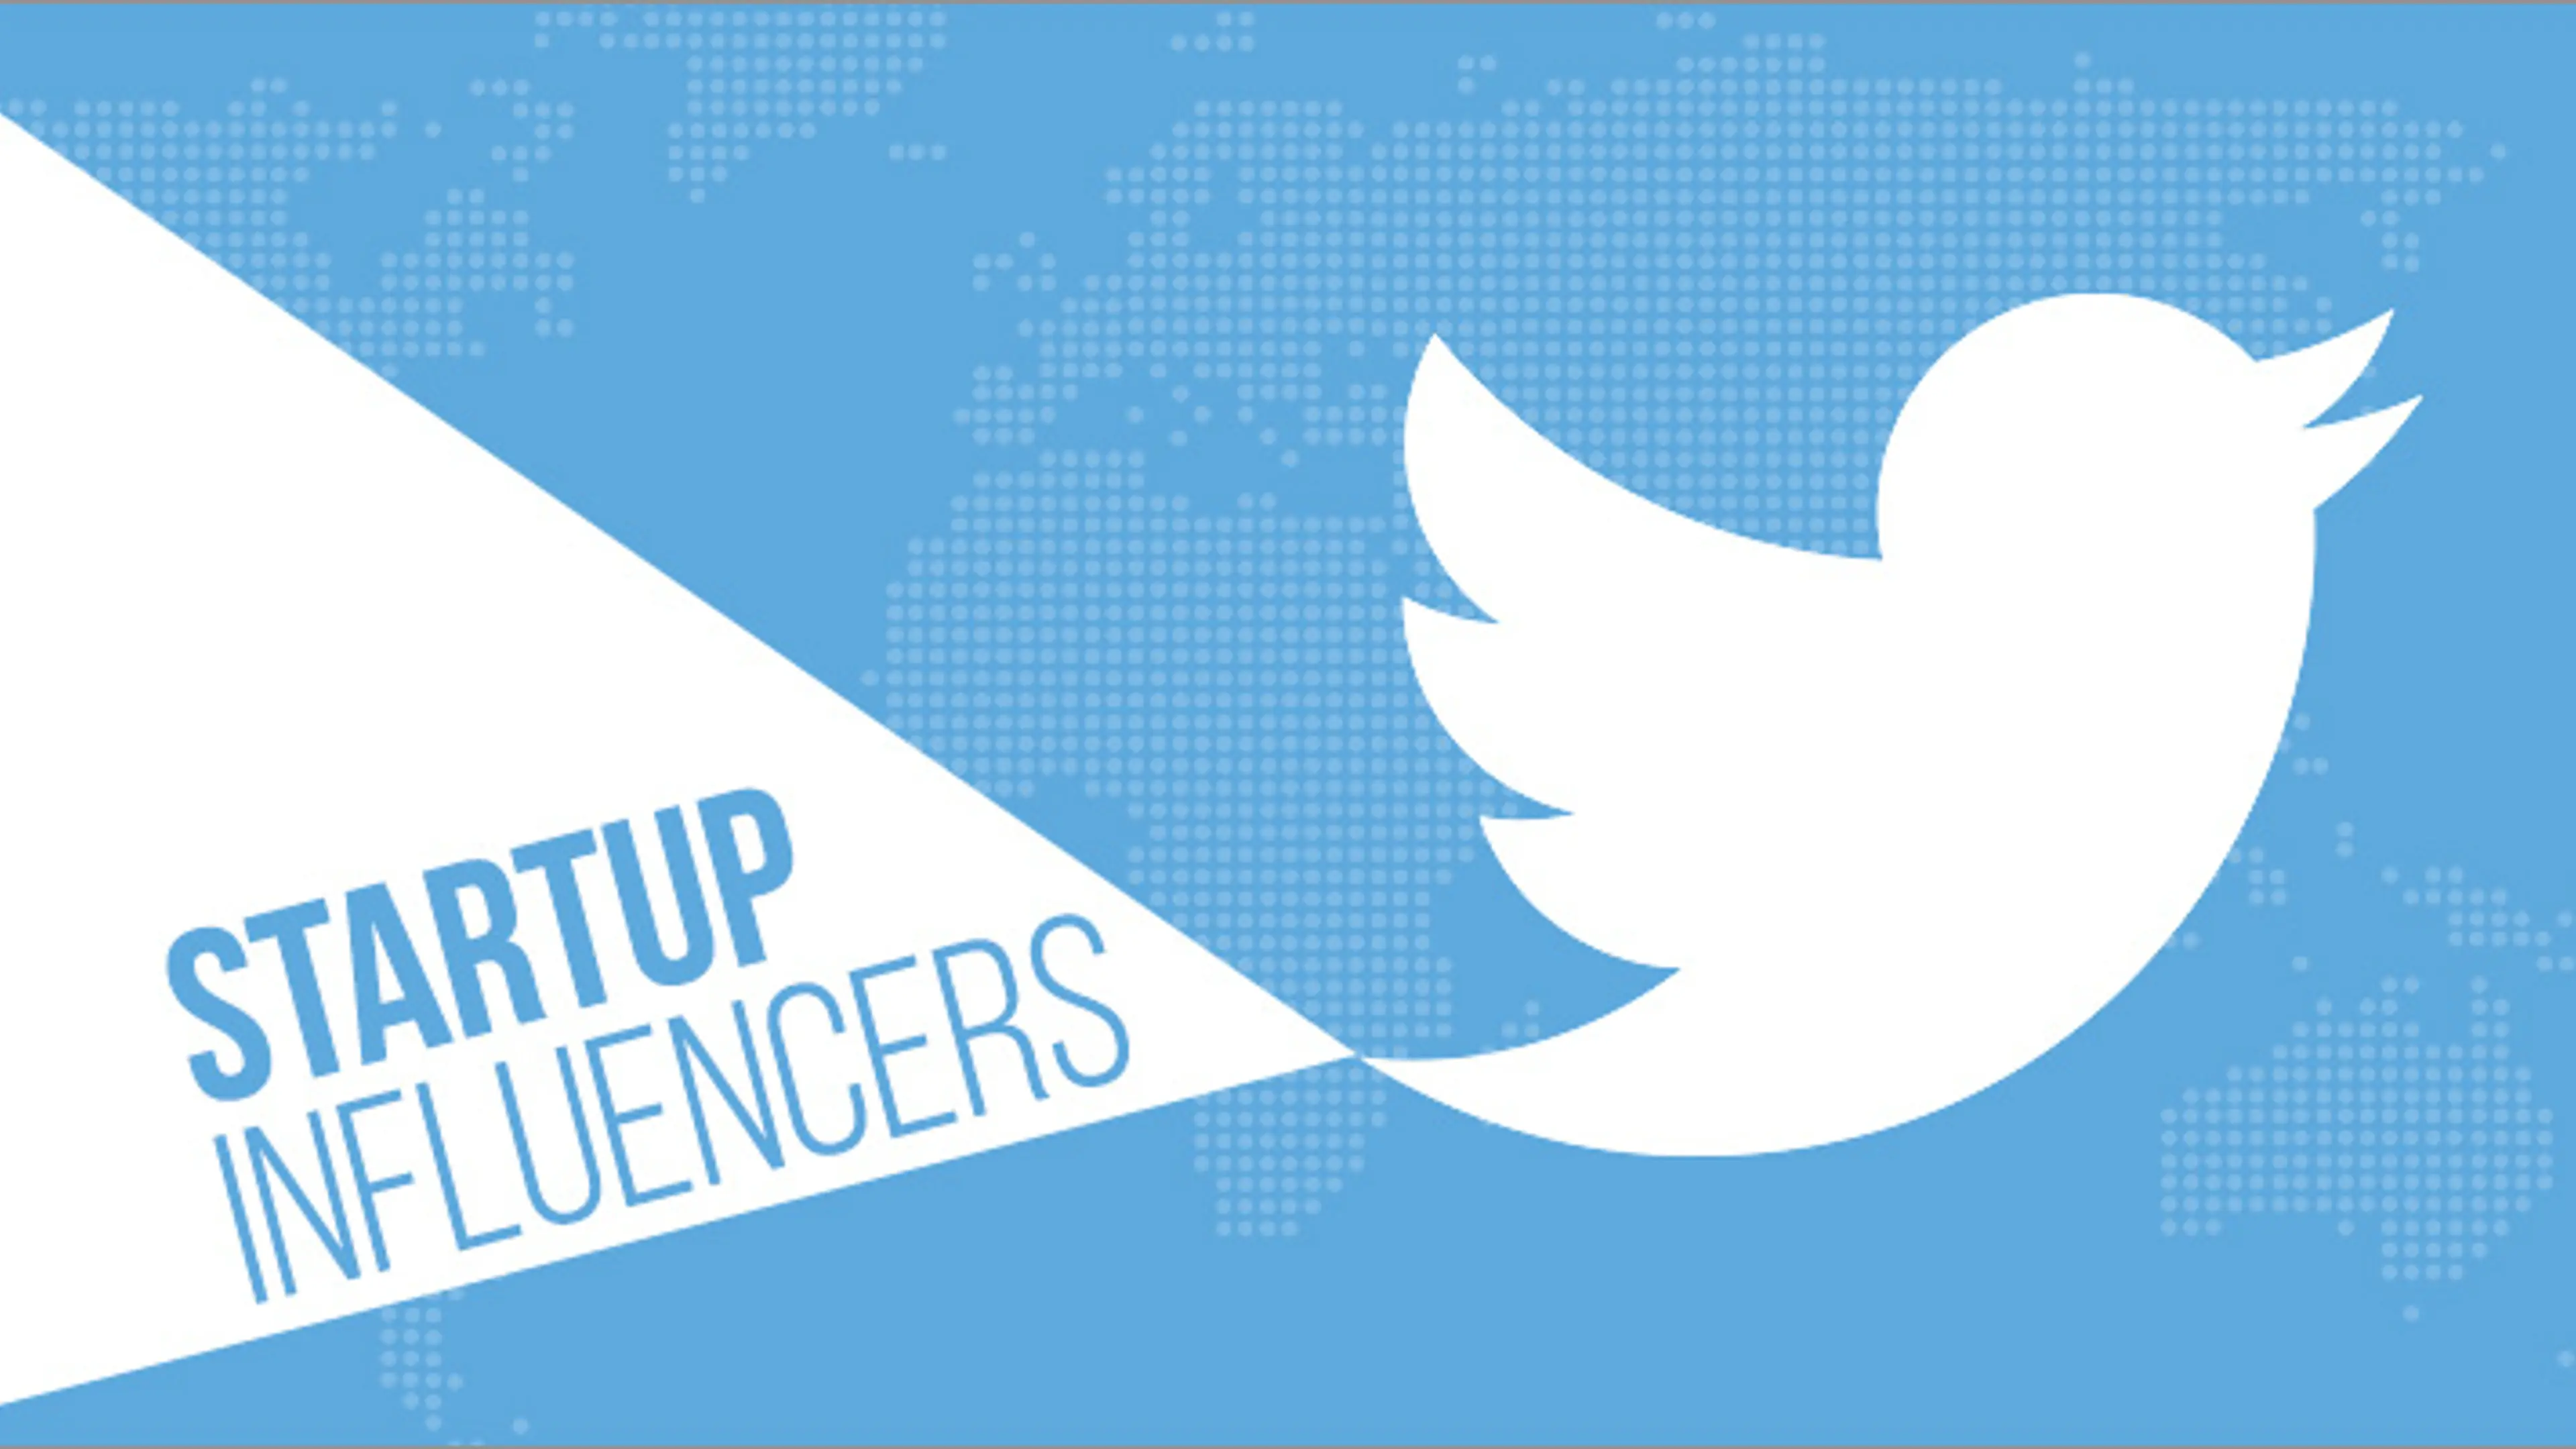 These 23 tweeters will keep you plugged into the startup ecosystem. Follow ‘em now!